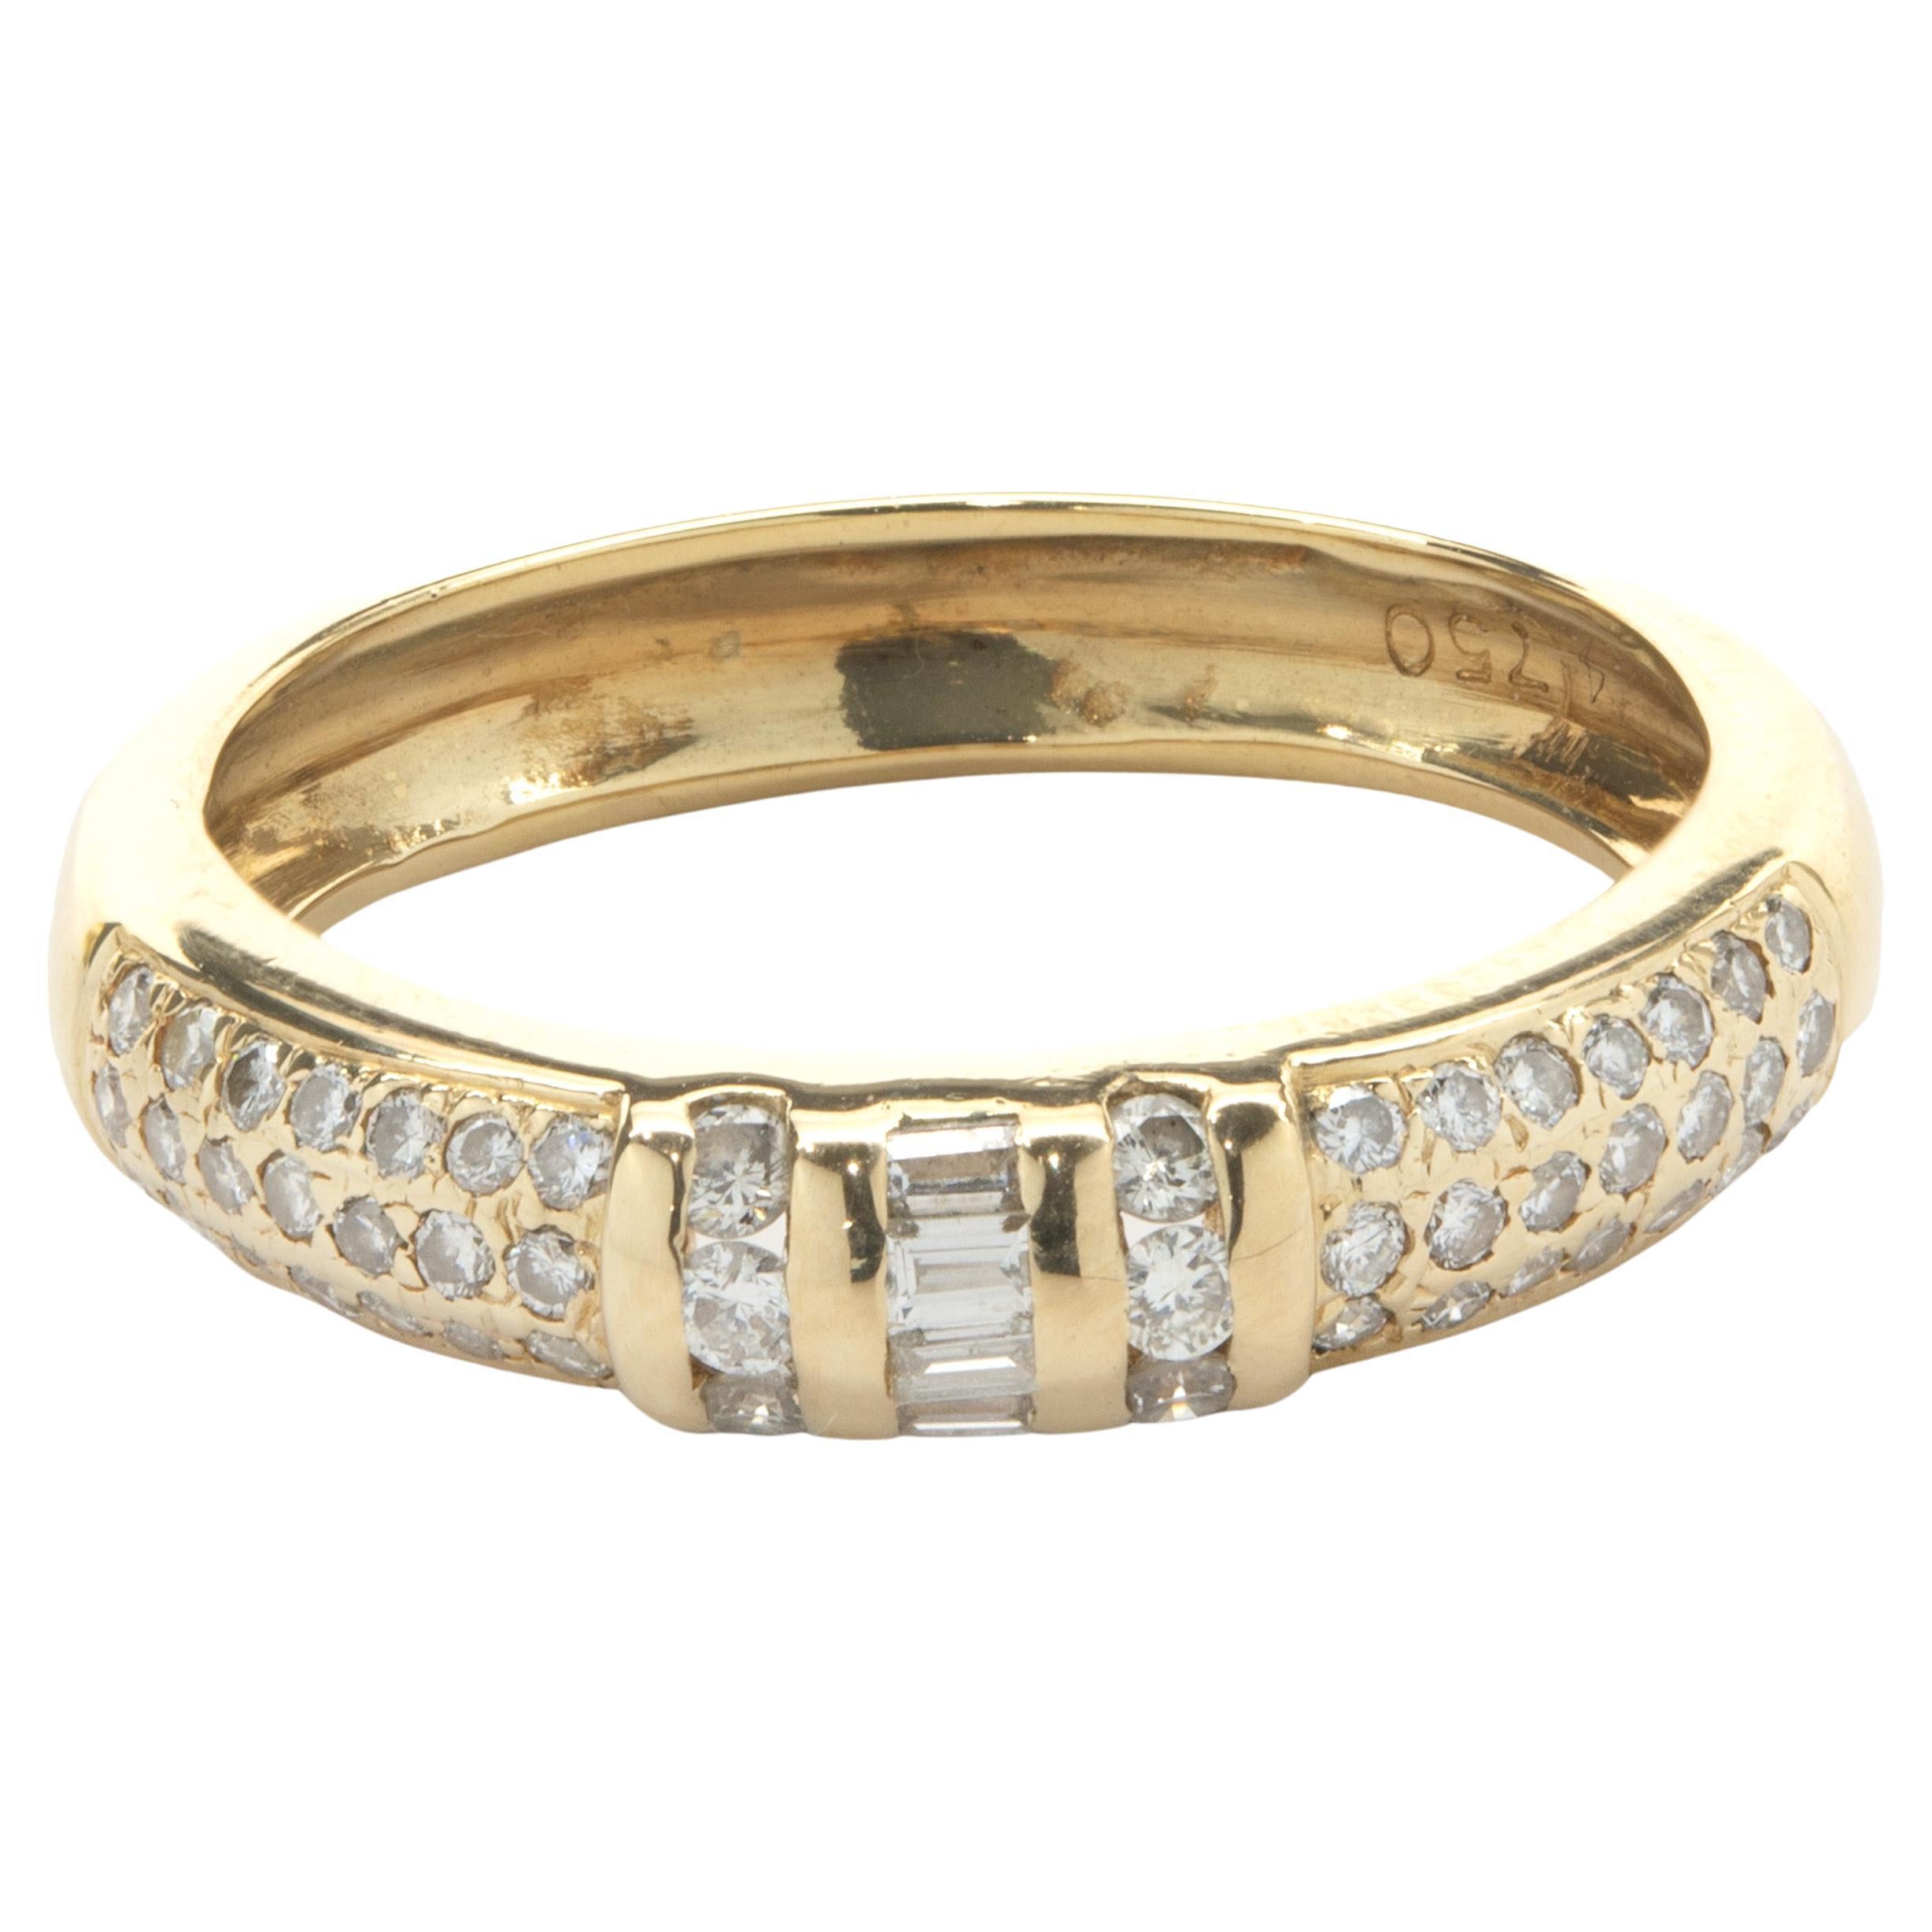 18k Yellow Gold Pave Diamond Band with Channel Set Round and Baguette Cut Center